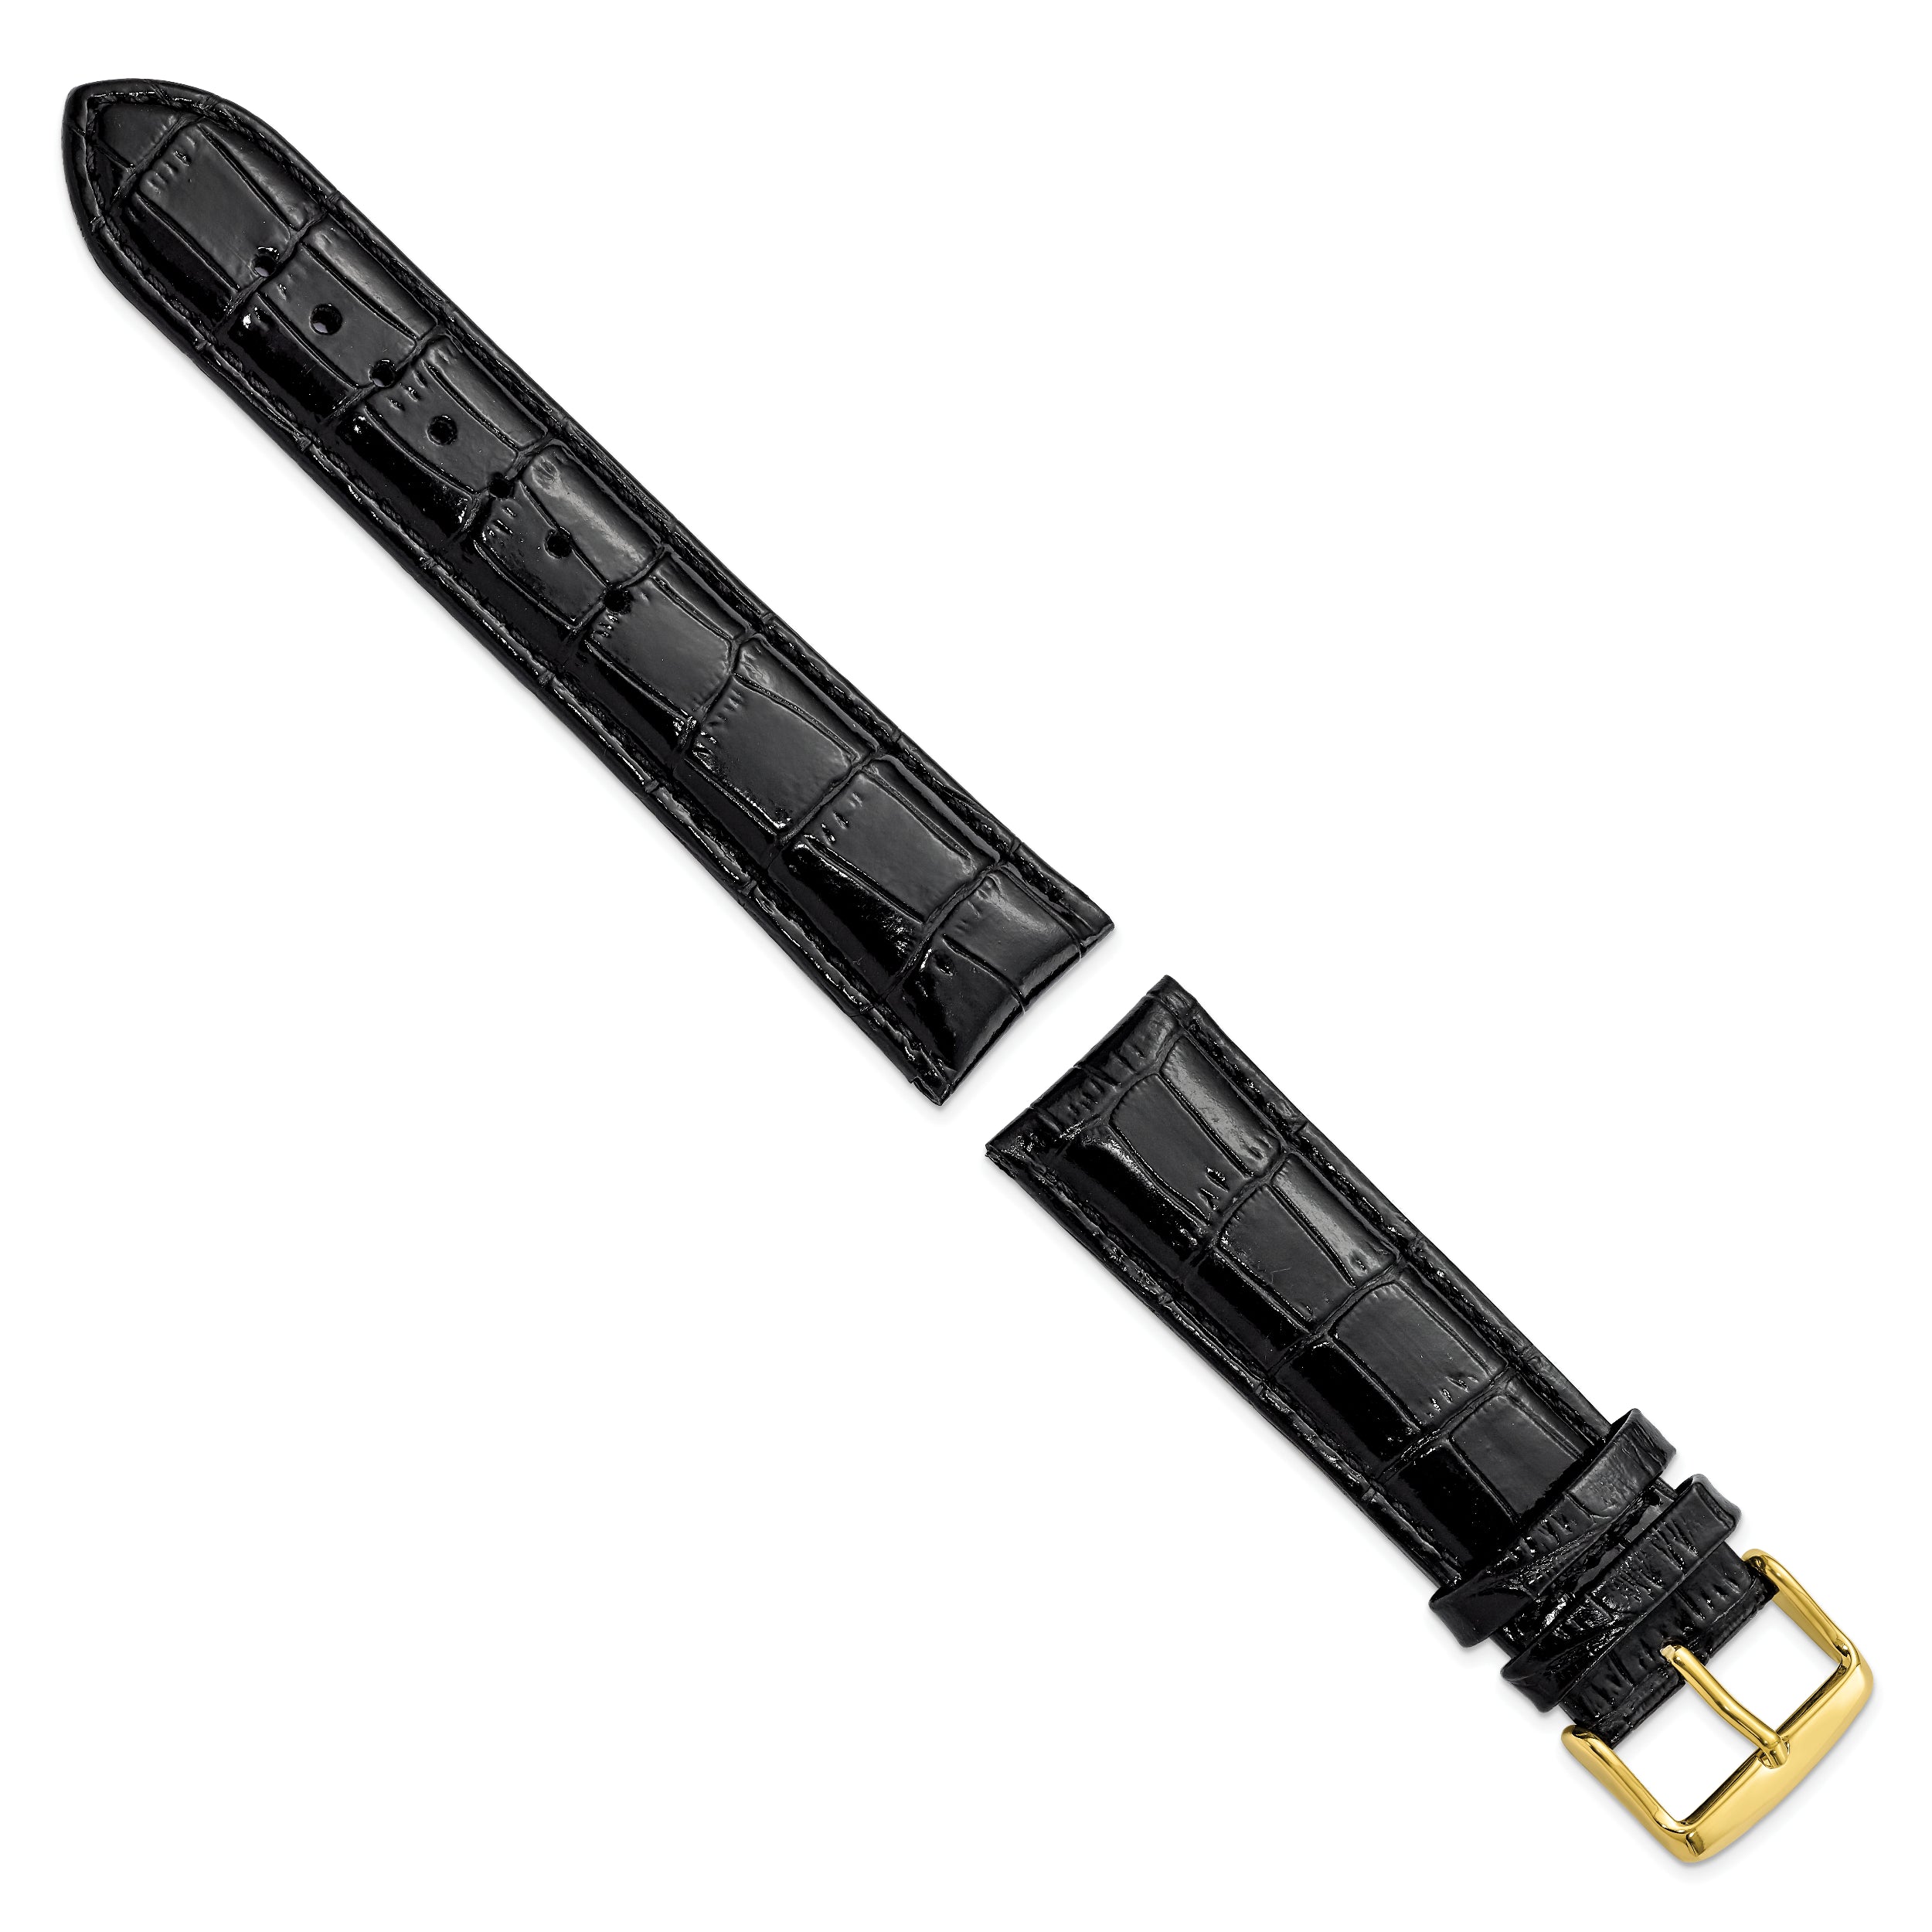 12mm Black Crocodile Grain Chronograph Leather with Gold-tone Buckle 6.75 inch Watch Band